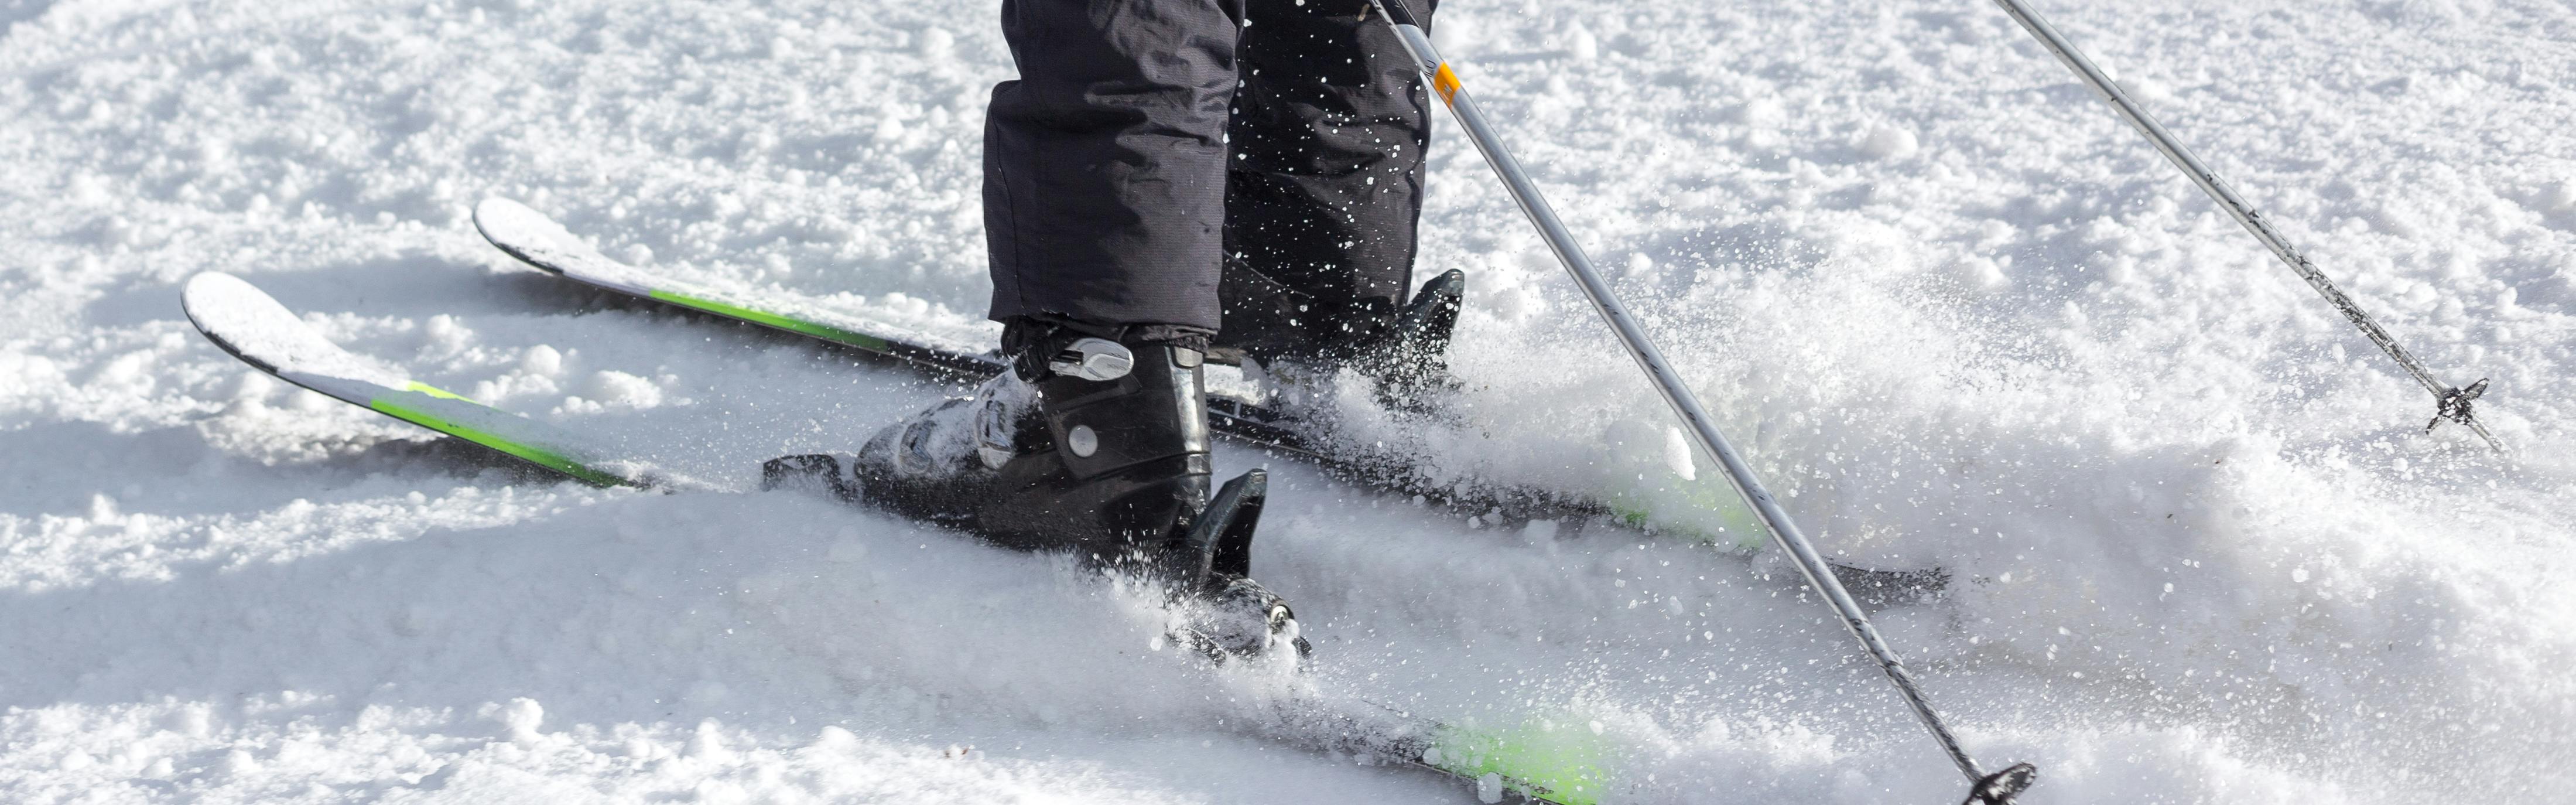 5 Reasons Your Ski Boots Might Be Hurting Your Feet